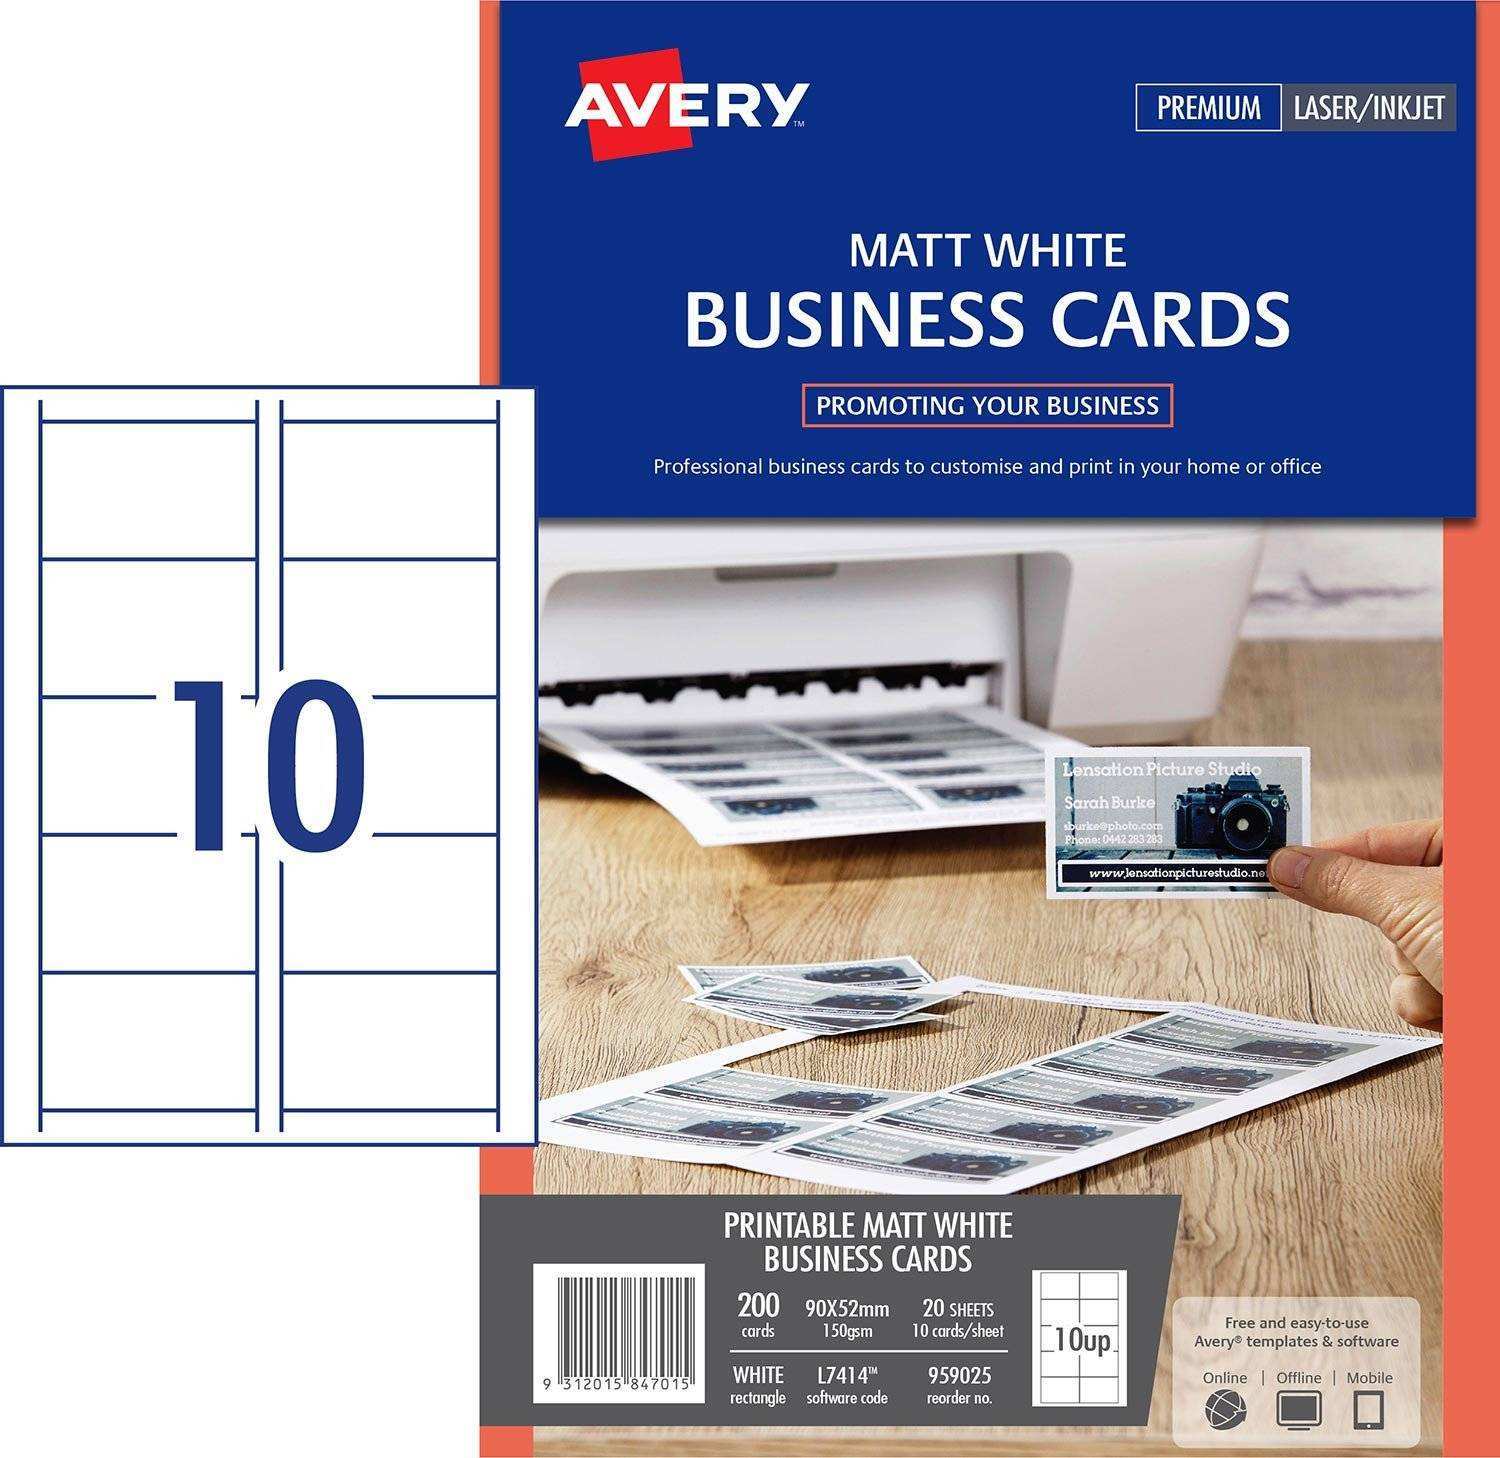 83 Avery Business Card Template Software in Photoshop for Avery Business Card Template Software